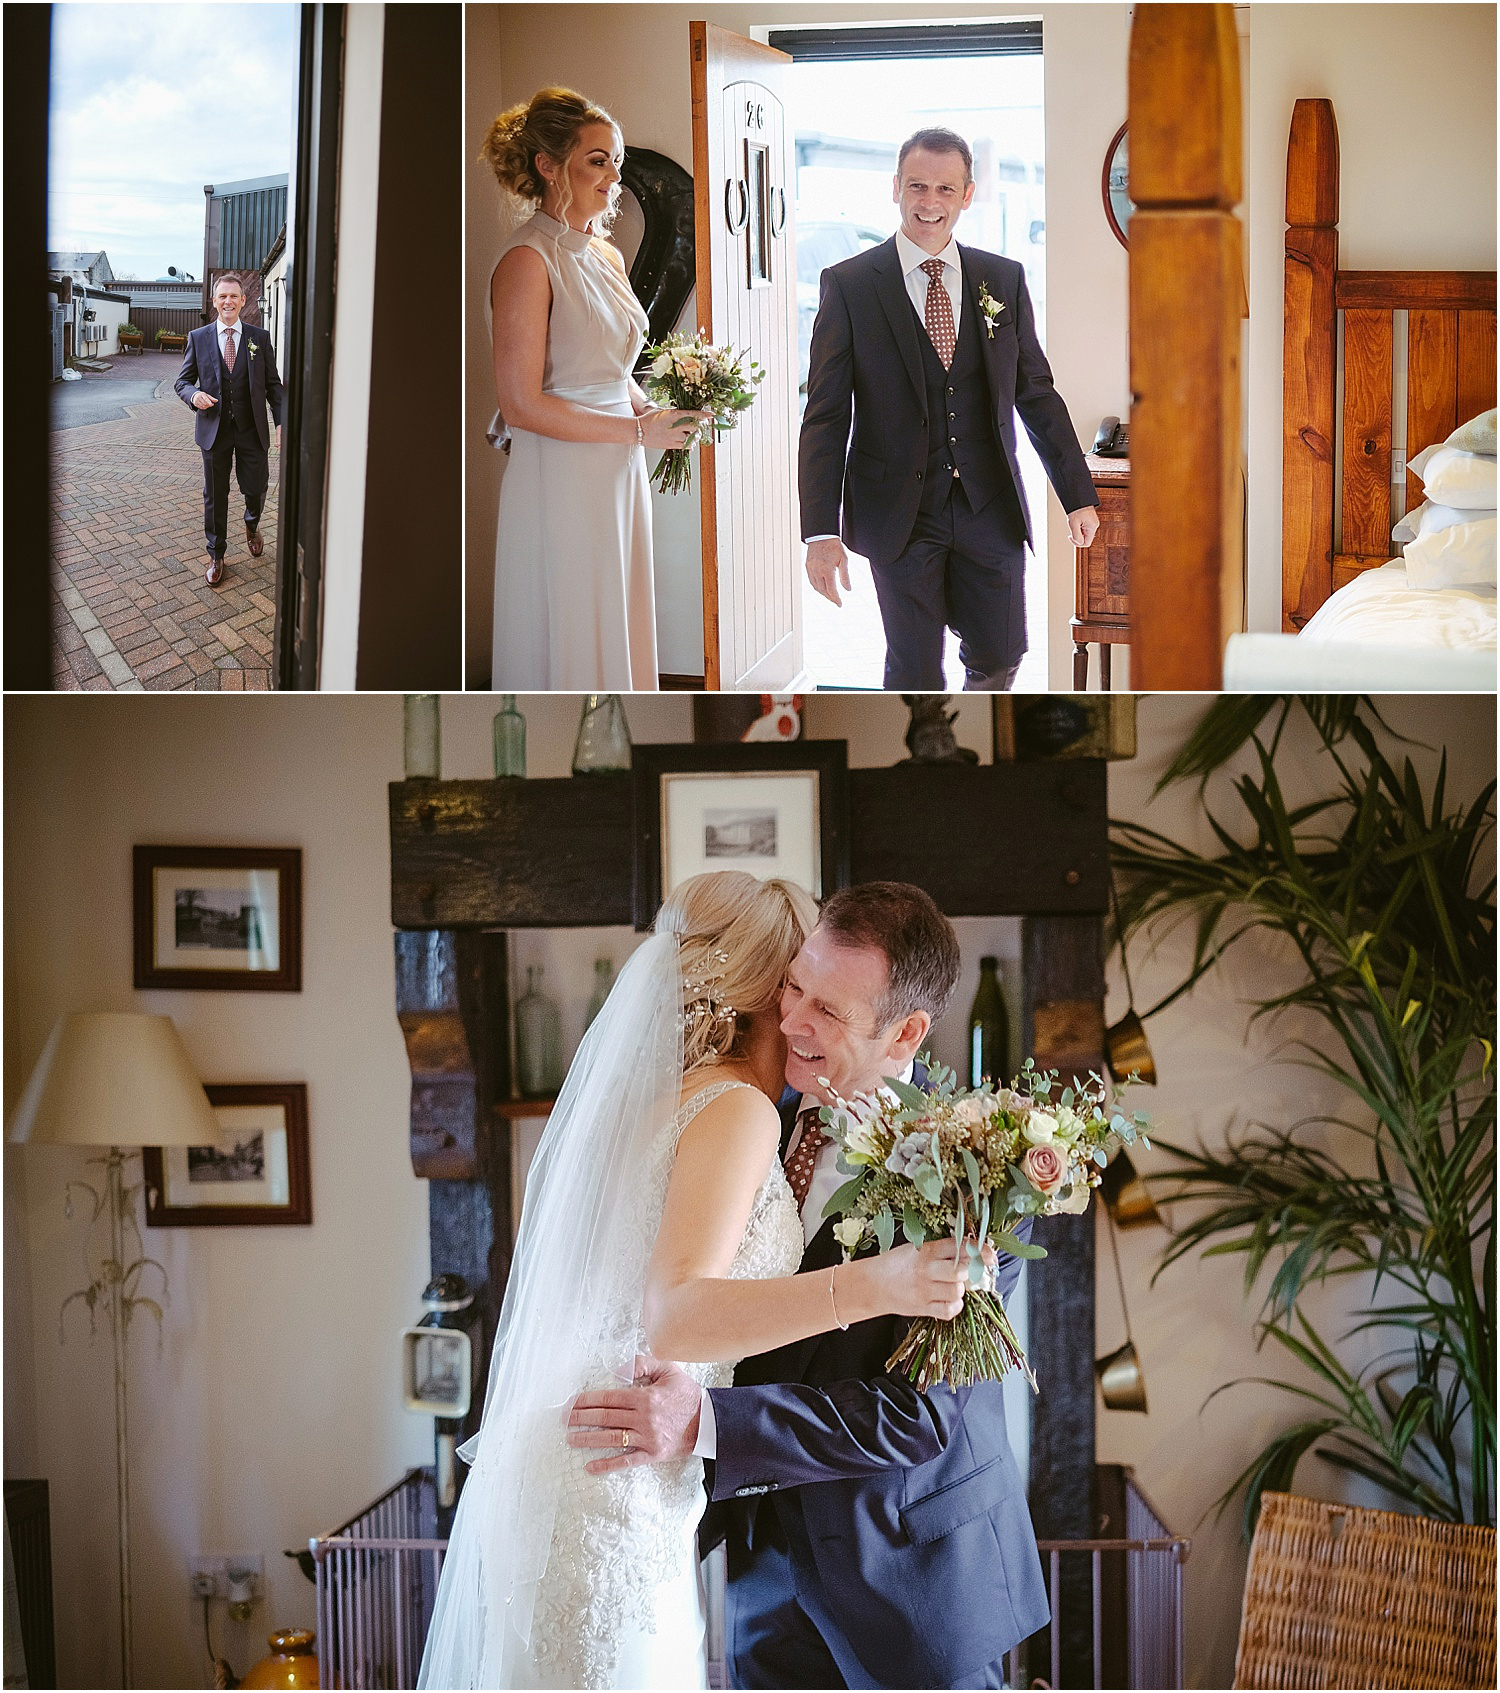 South Causey Inn wedding photography by 2tone Photography 012.jpg